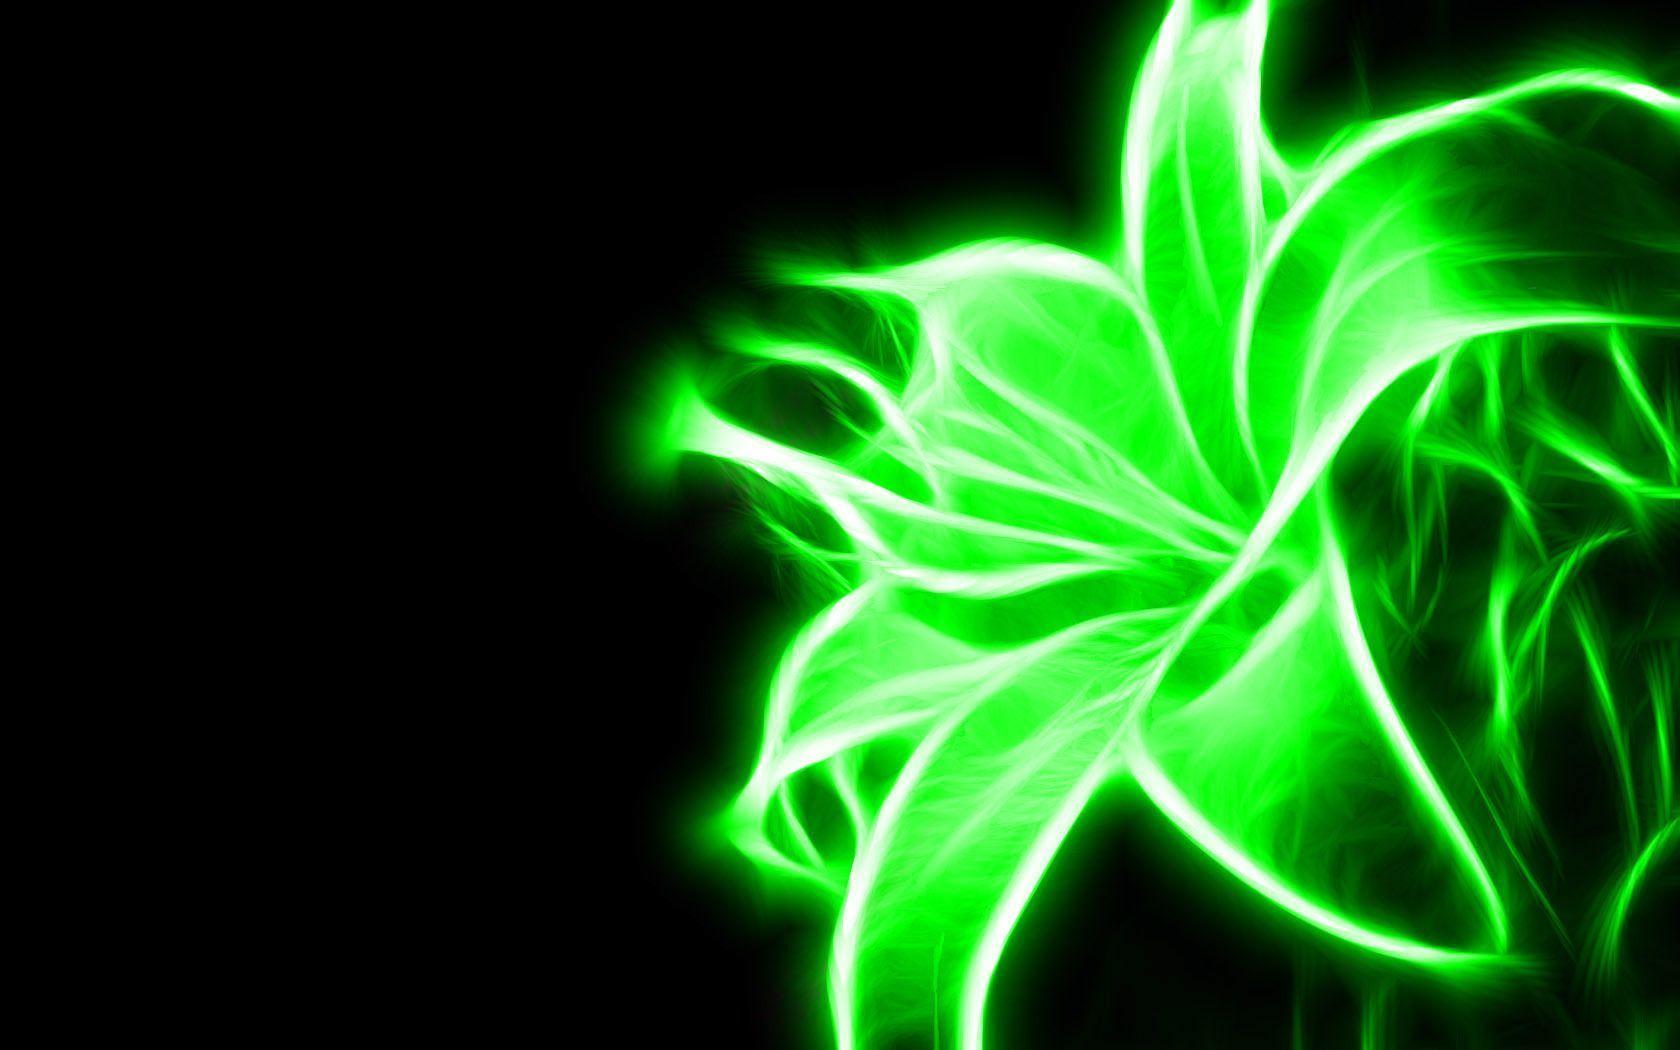 Wallpaper For > Awesome Neon Background